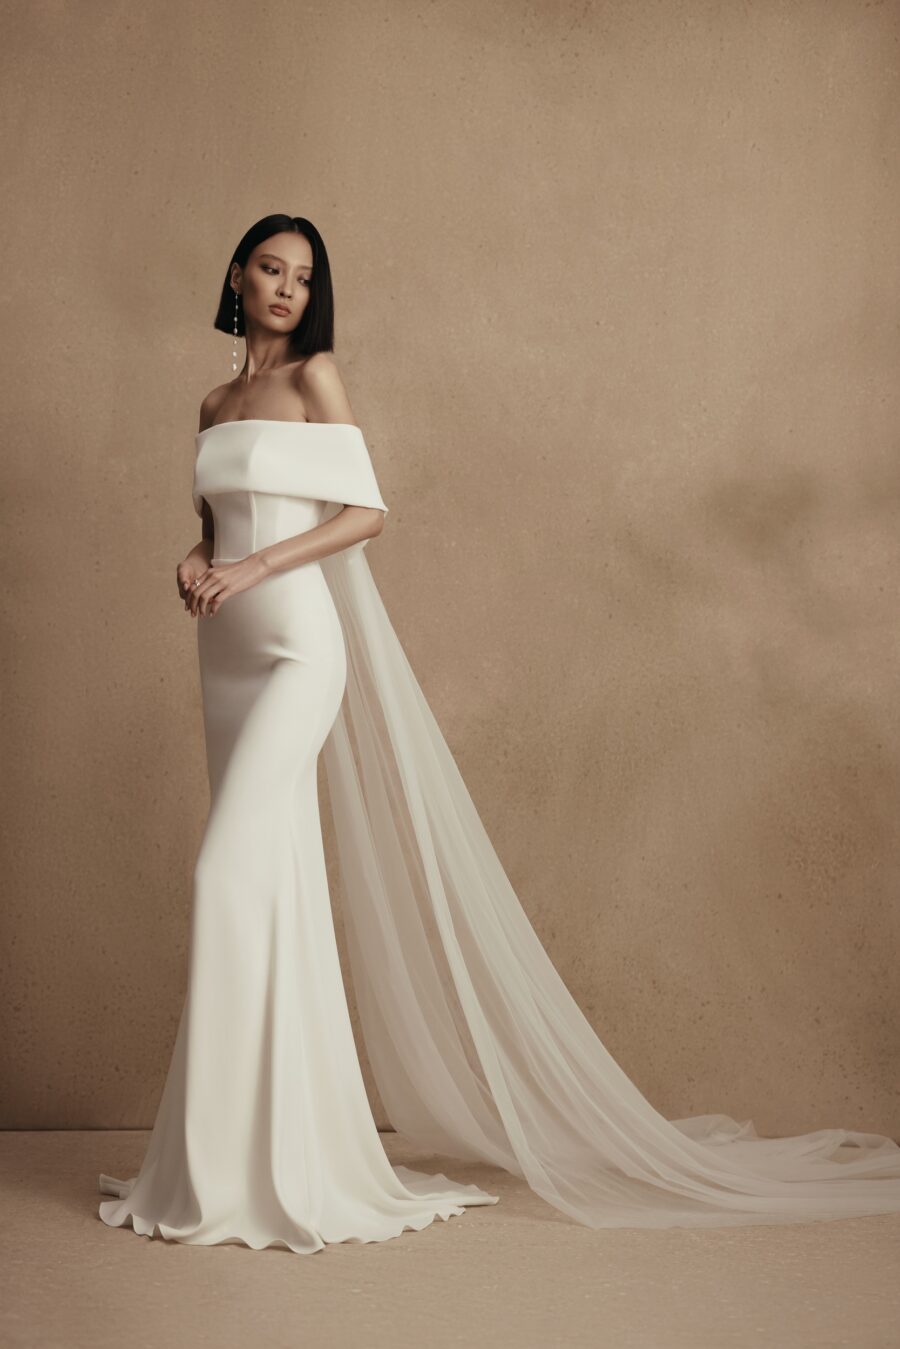 Moore 8 wedding dress by woná concept from personality collection